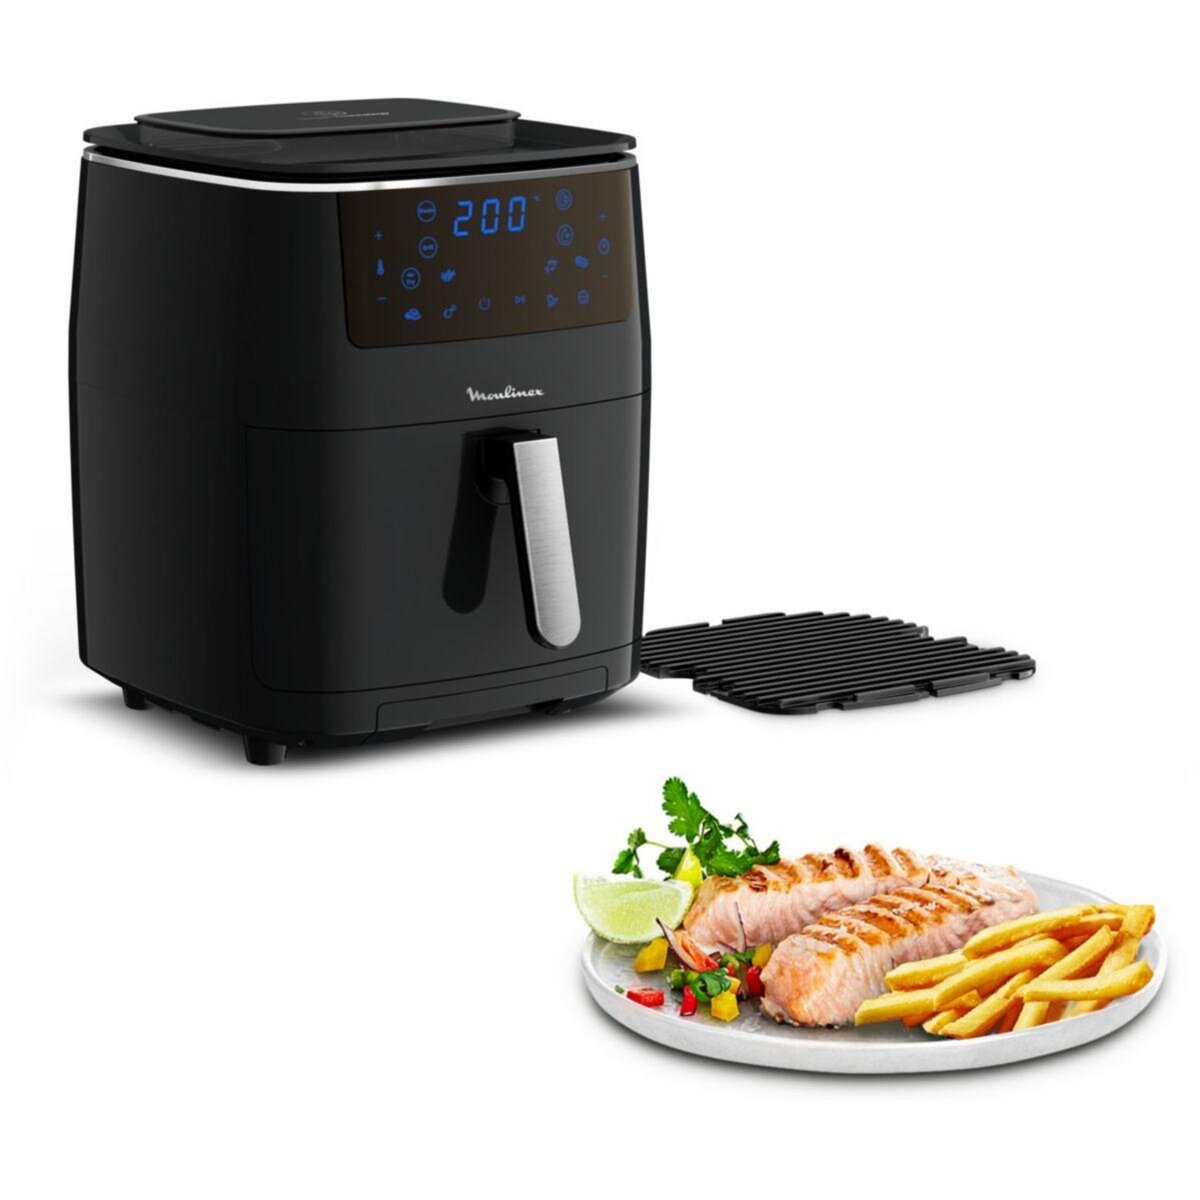 Friteuse sans huile Moulinex Easy Fry & Grill (via coupon